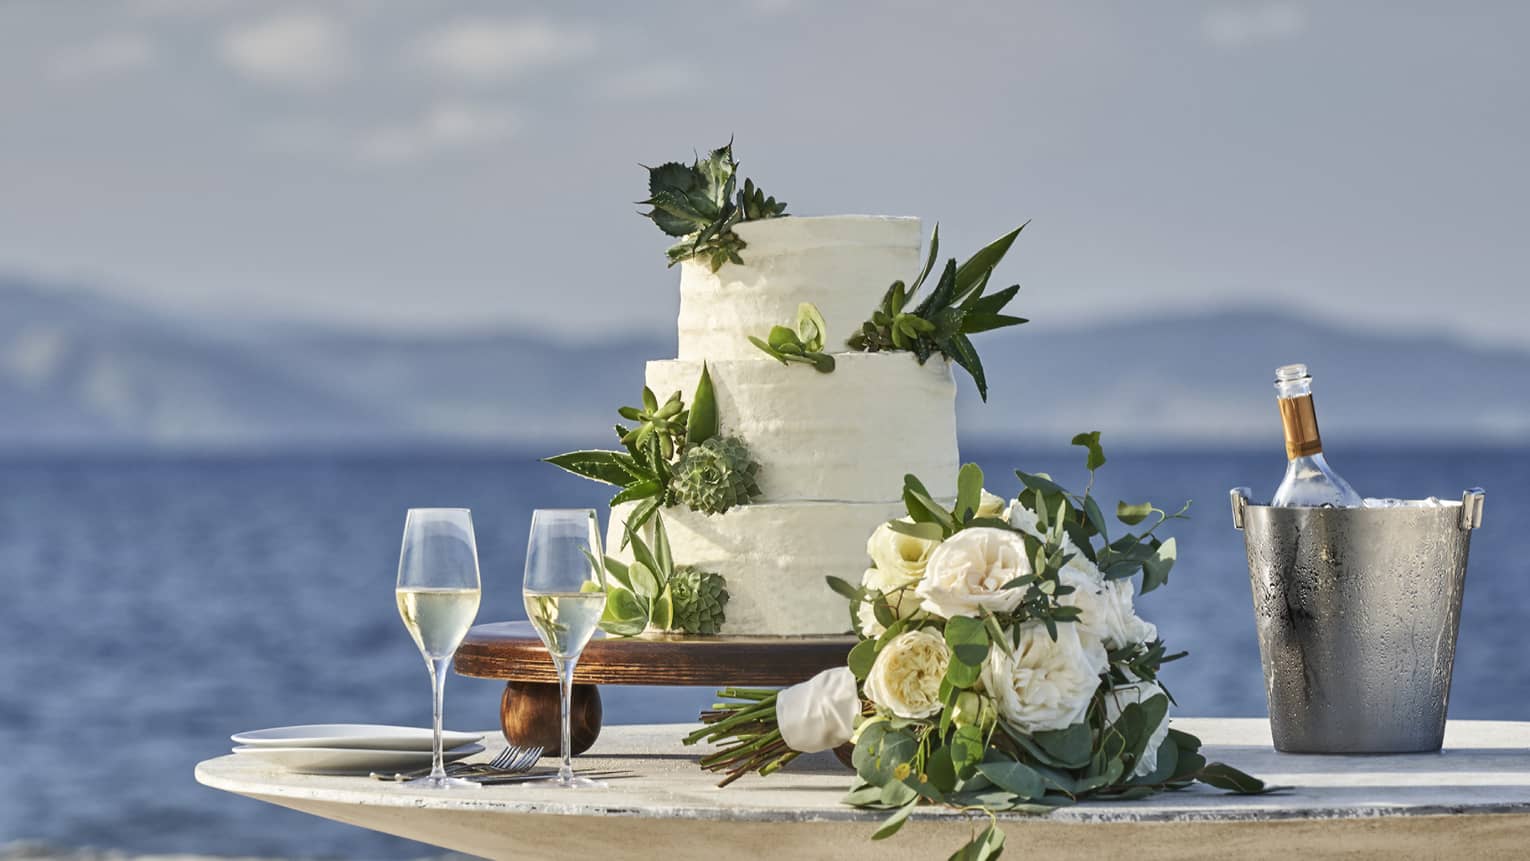 Three-tier wedding cake with green foliage decoration on outdoor table with matching bouquet, two glasses of champagne, bucket of champagne on ice